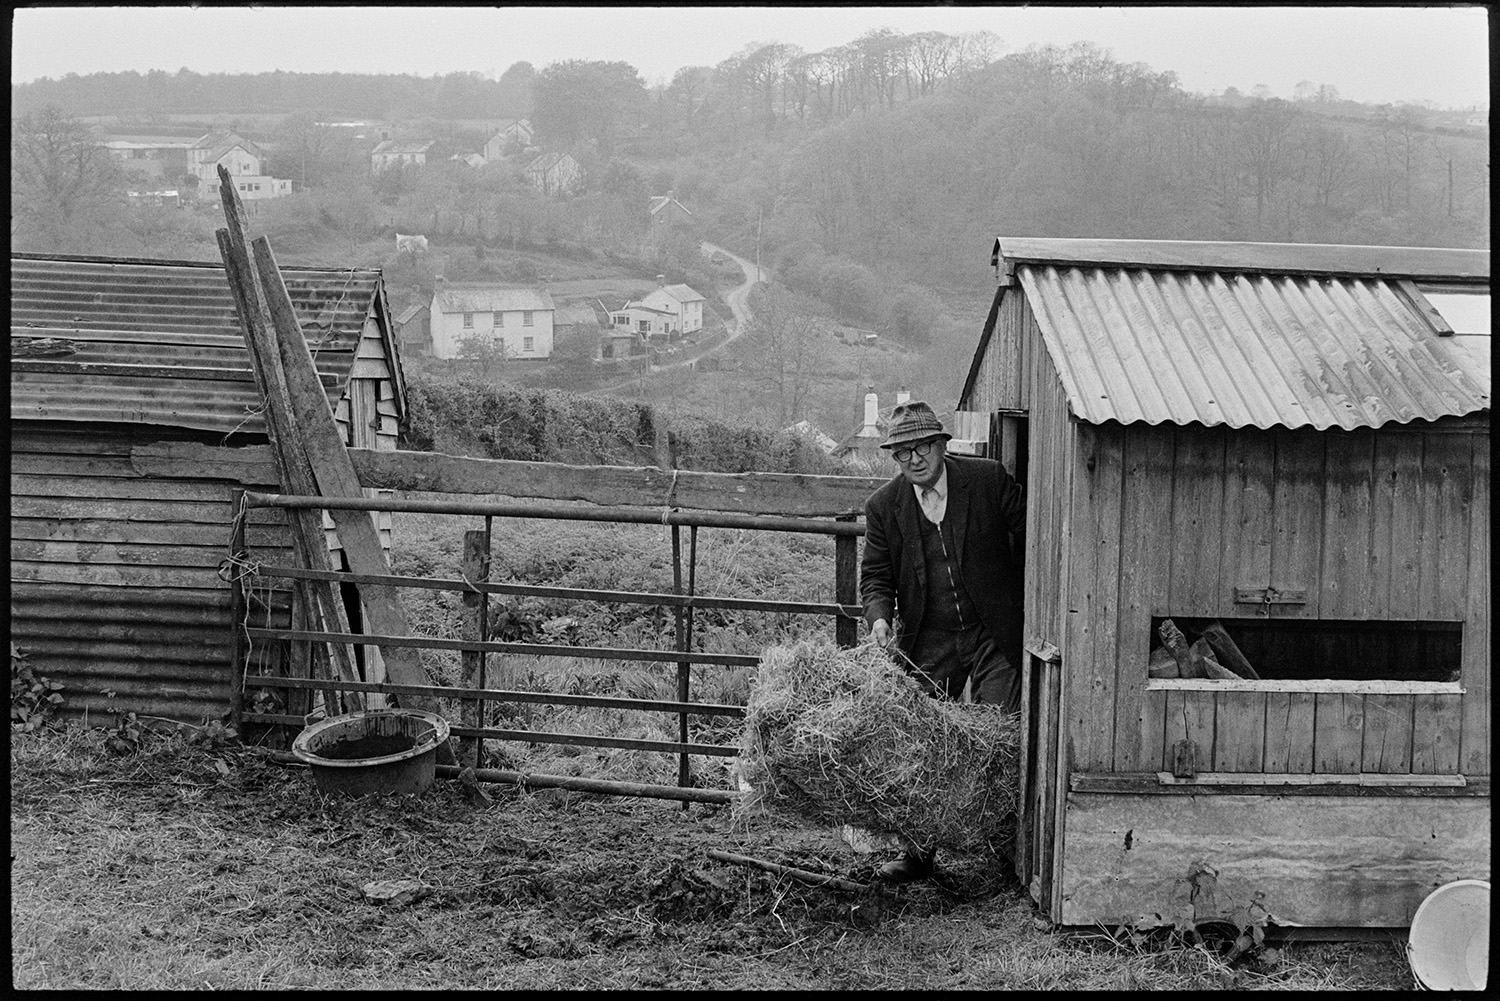 Farmer feeding cow, poultry shed. 
[Mr Parkhouse taking a bale of hay out of a wooden poultry shed with a corrugated iron roof to feed to a cow, at Hollocombe. Houses and woodland are visible in the background.]